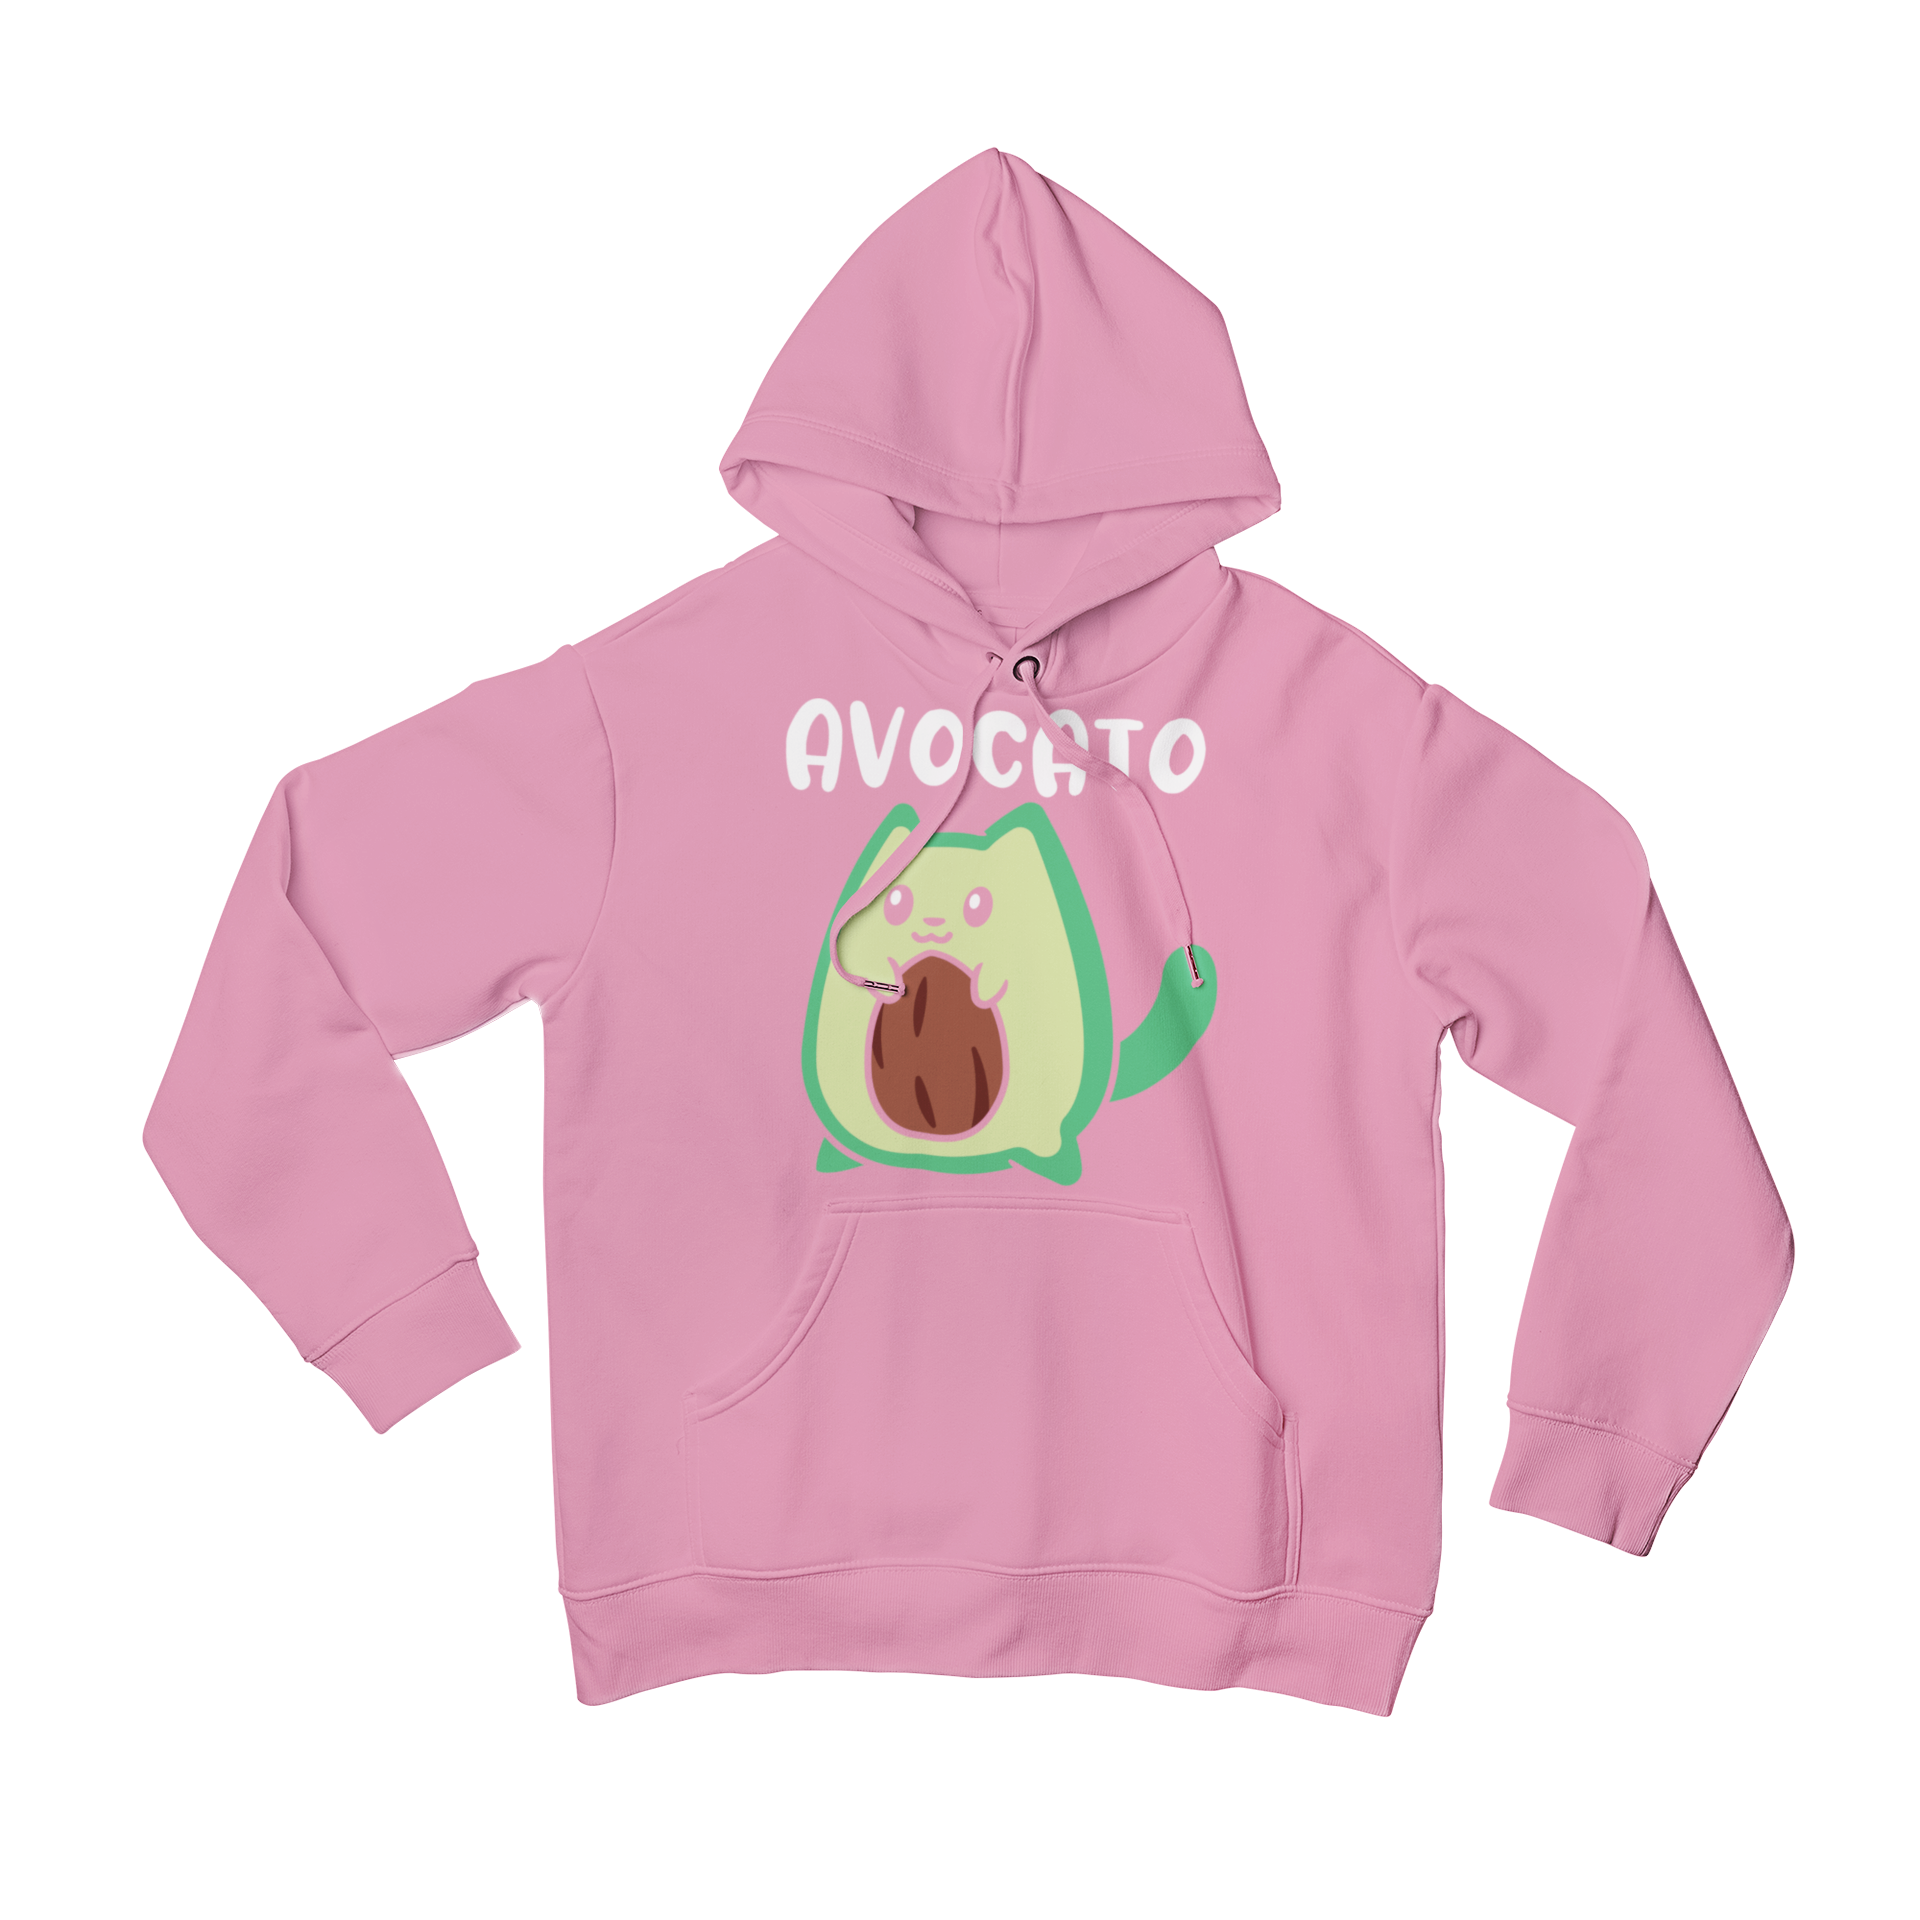 Looking for a fun and unique way to show off your love for cats and avocados? Check out Teevolution's graphic hoodie, featuring a playful print of an avocado mashed with a cat and the phrase "avacato". Stay warm and stylish with this fun and cozy hoodie!